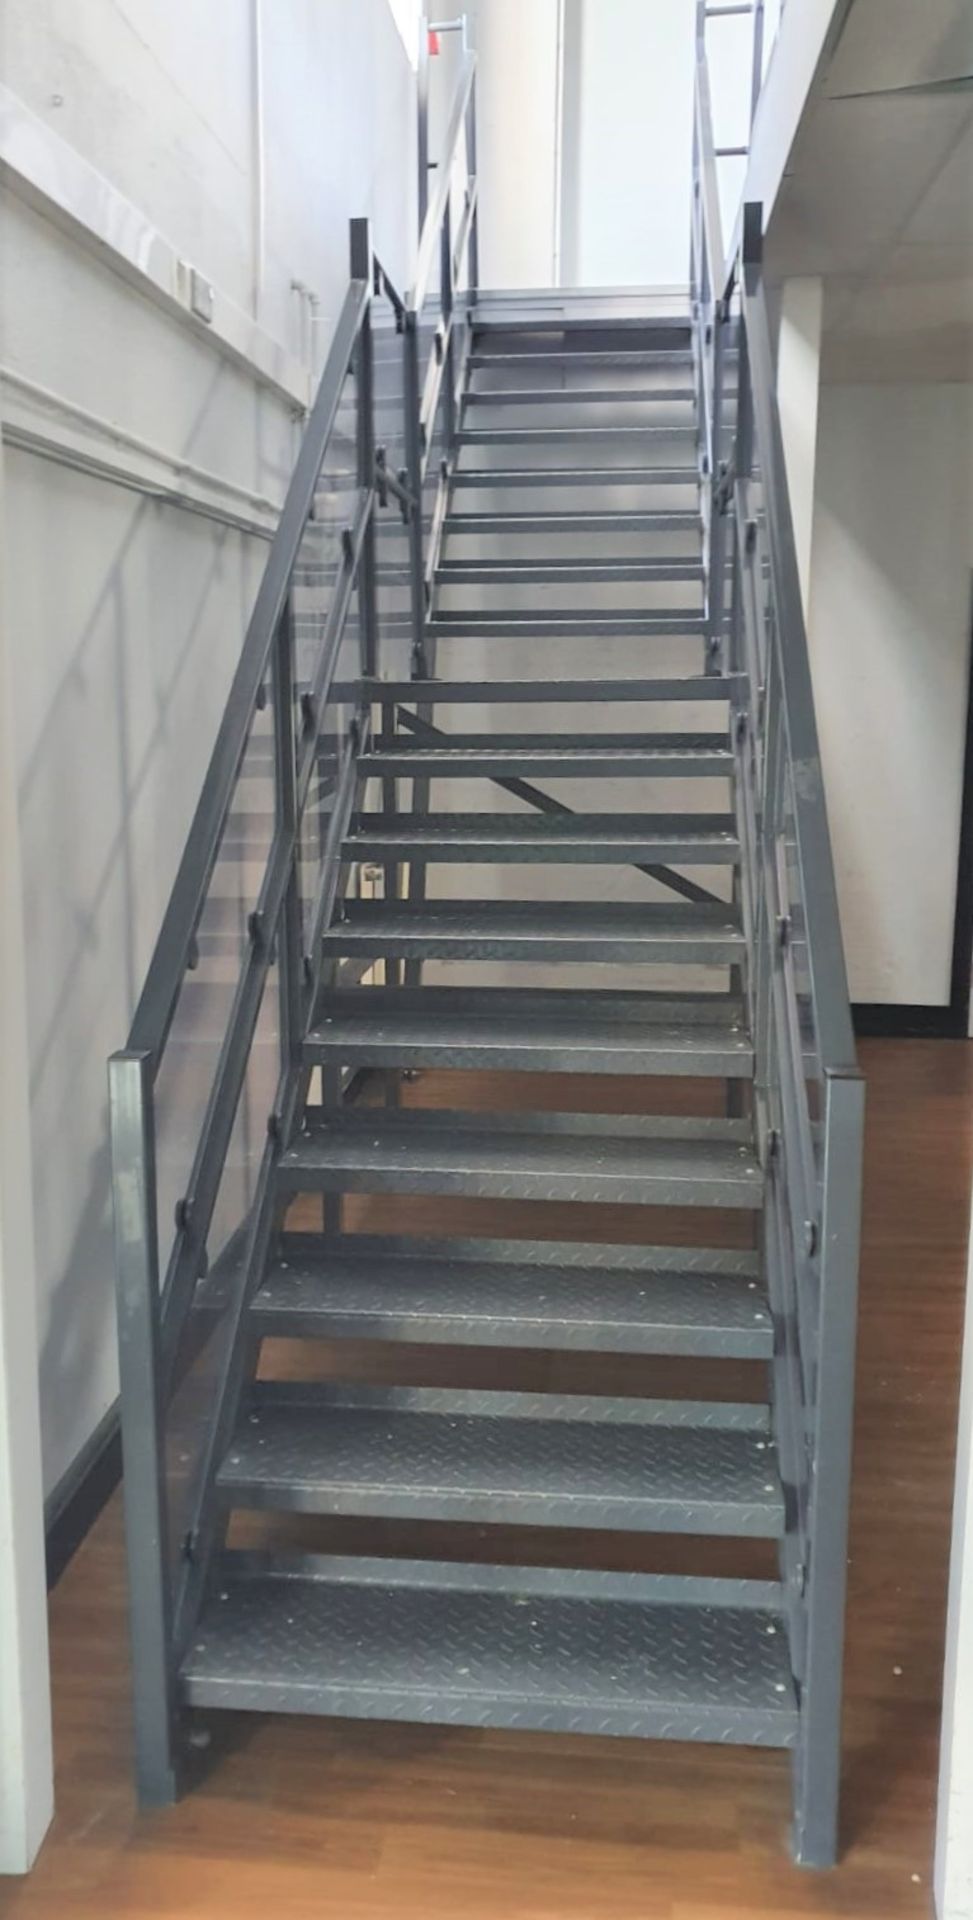 1 x Freestanding Staircase With Top Landing Area and Glass Handrail Partitions - Approx Height 350